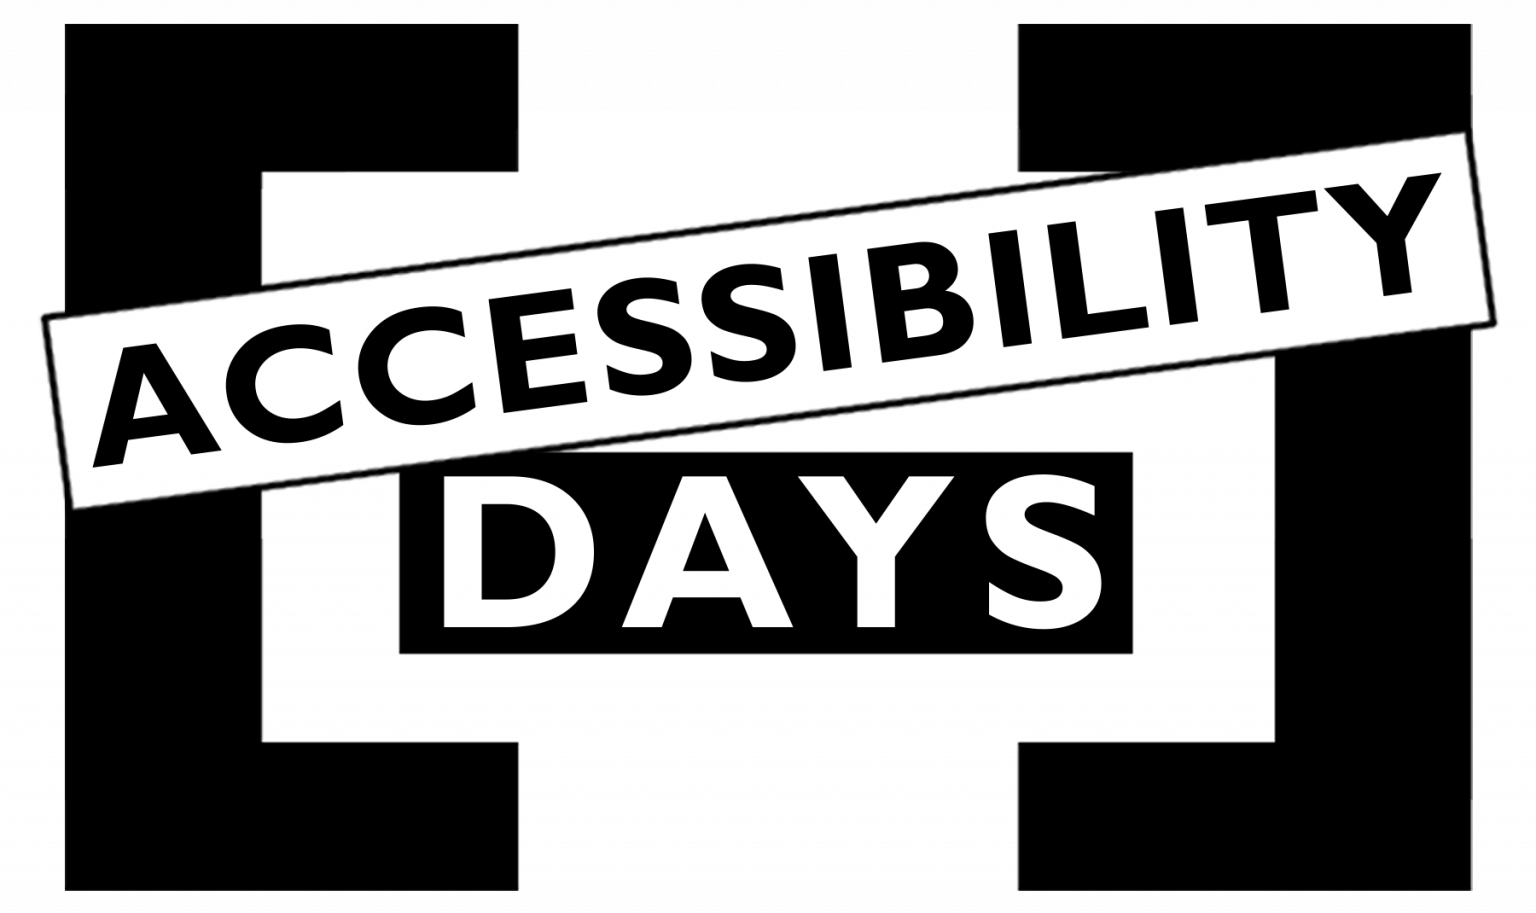 cropped acessibility days logo 1 1536x913